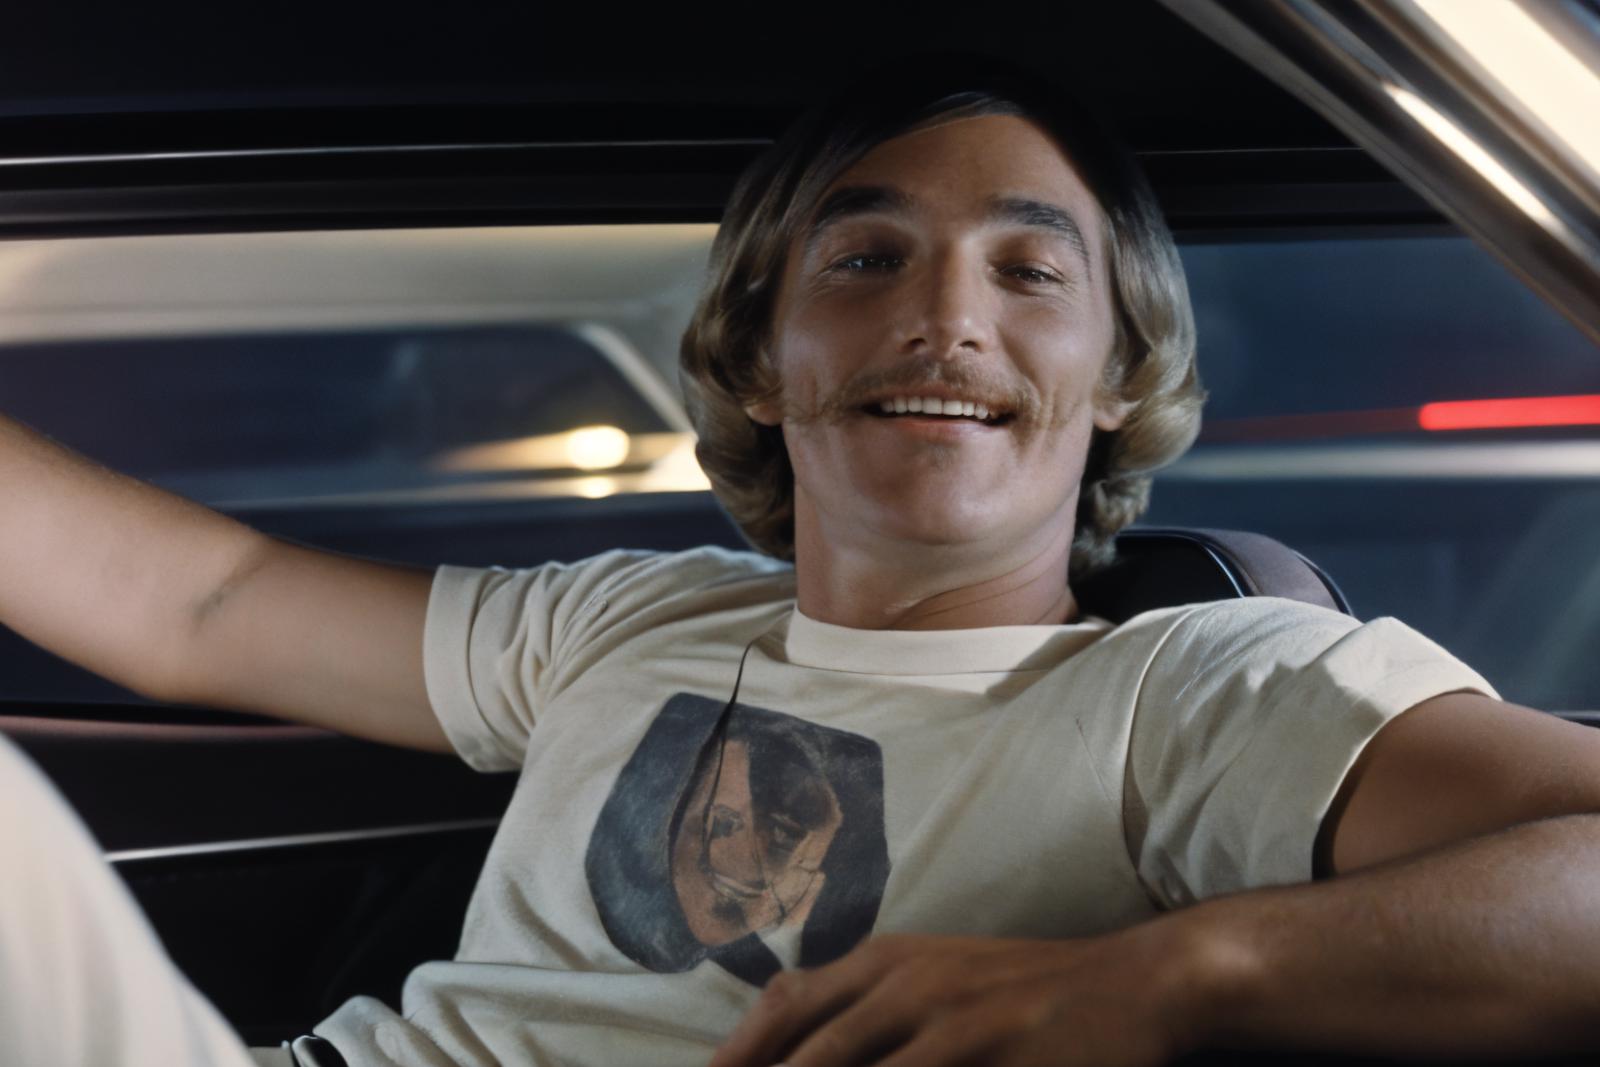 Dazed and Confused - Wooderson (Matthew McConaughey) image by WilliamTRiker